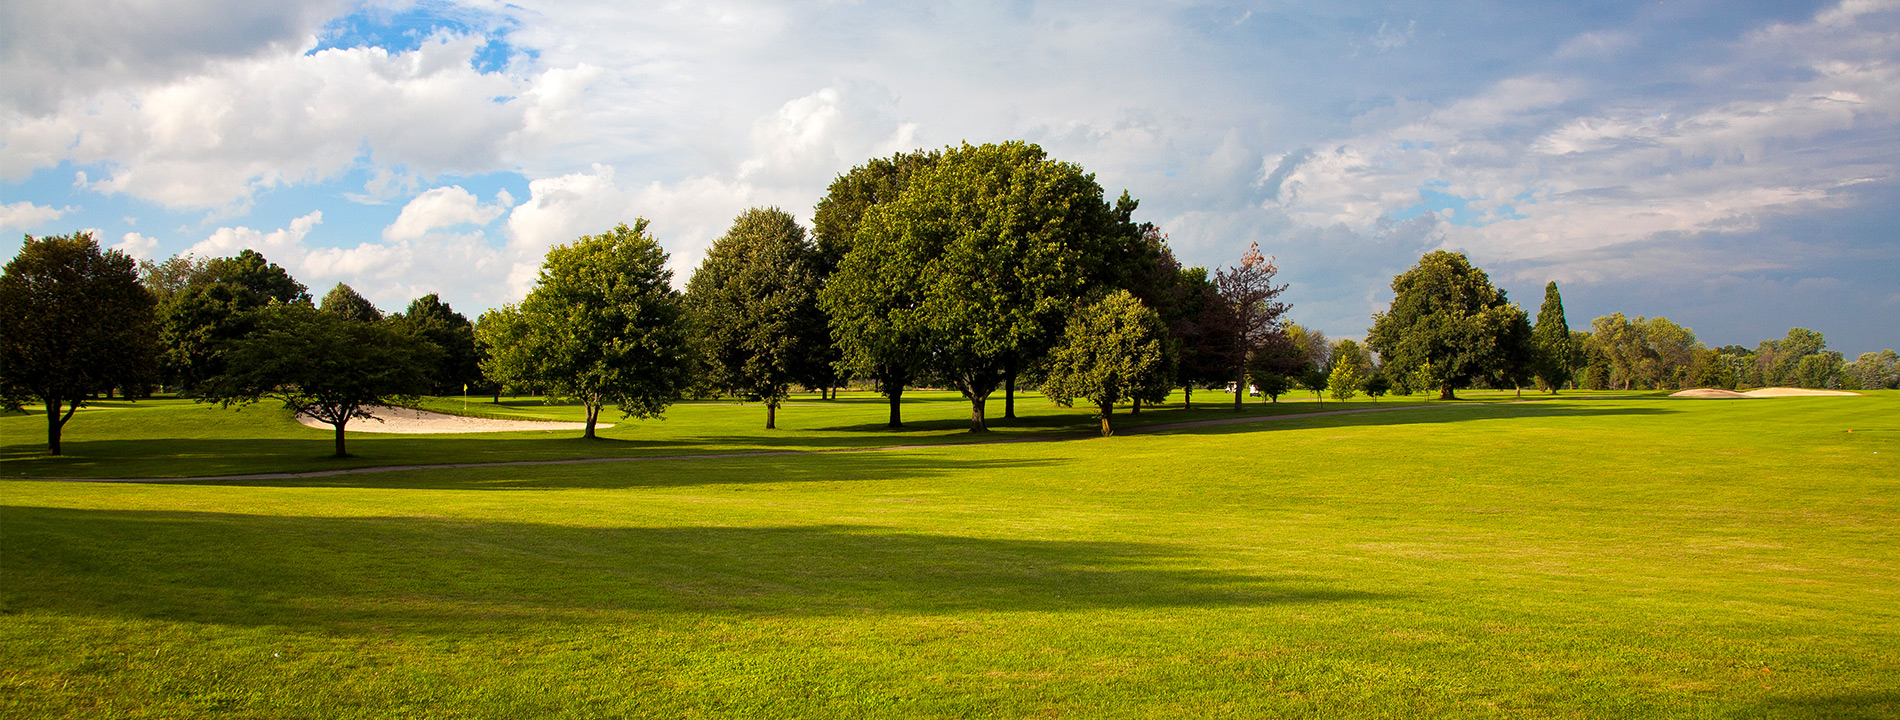 Green golf course with trees.